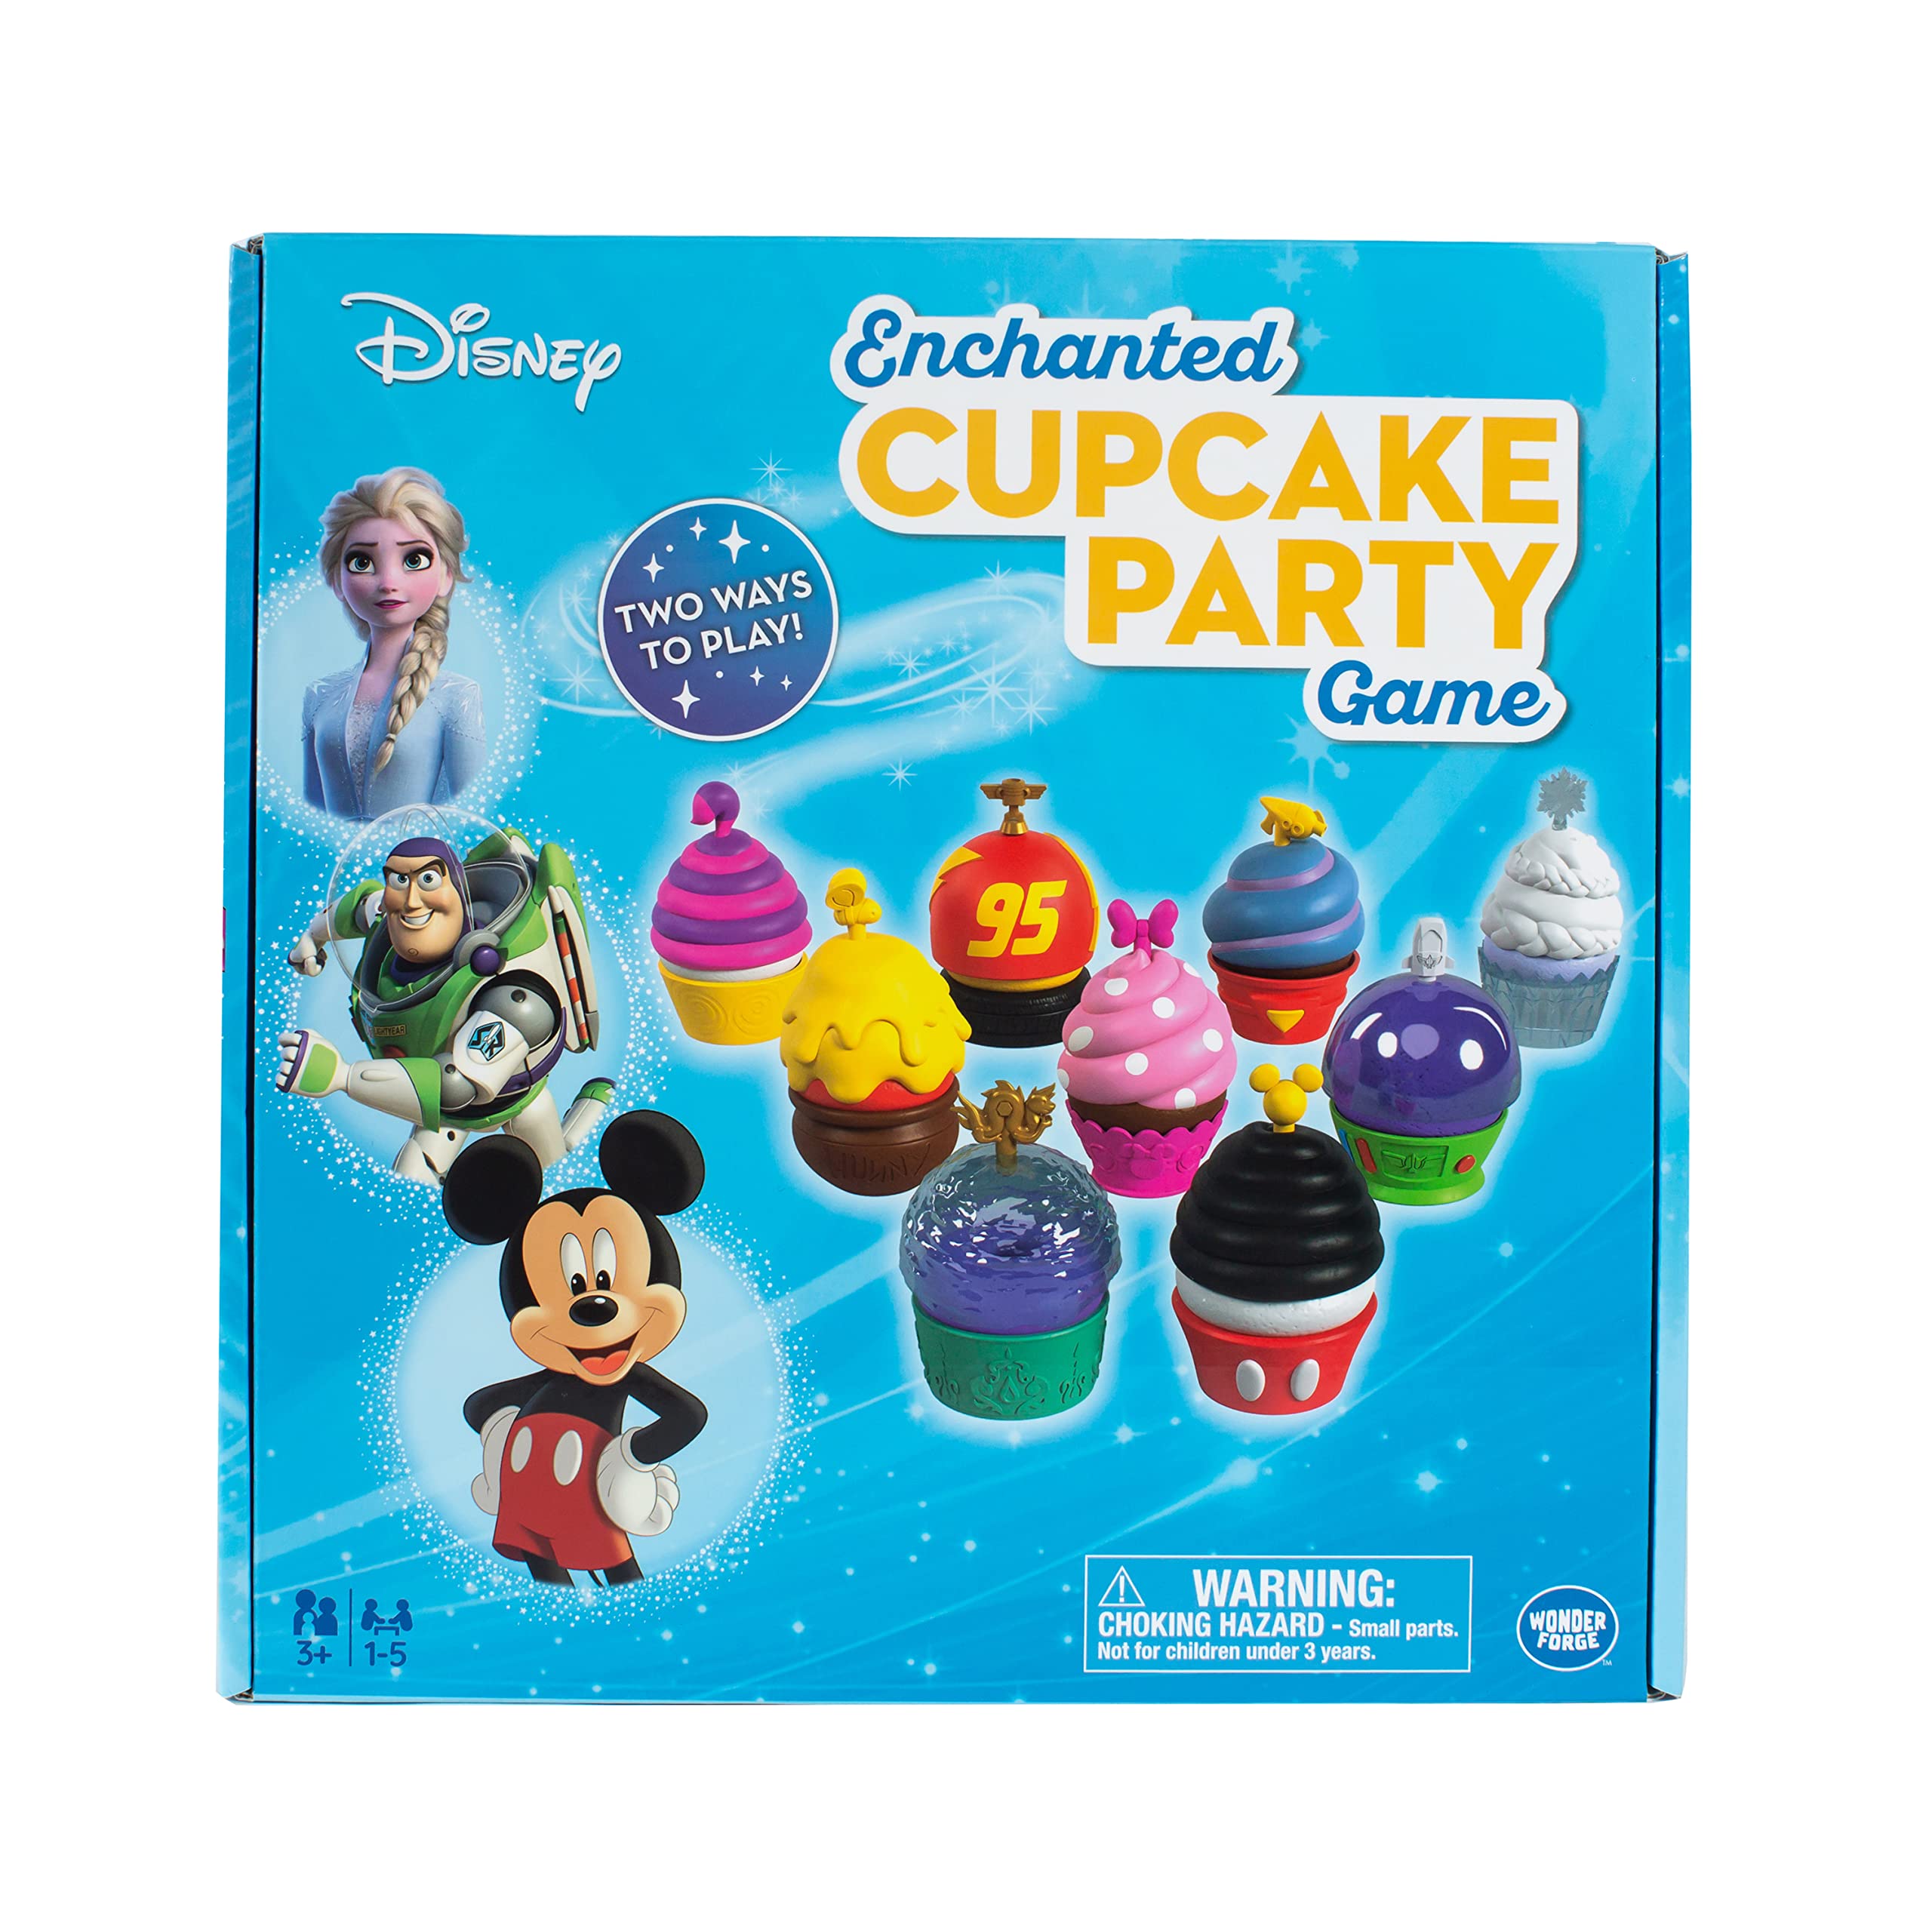 Wonder Forge Disney Enchanted Cupcake Party Game for Girls & Boys Age 3 & Up - A Fun & Fast Matching Game You Can Play Over & Over